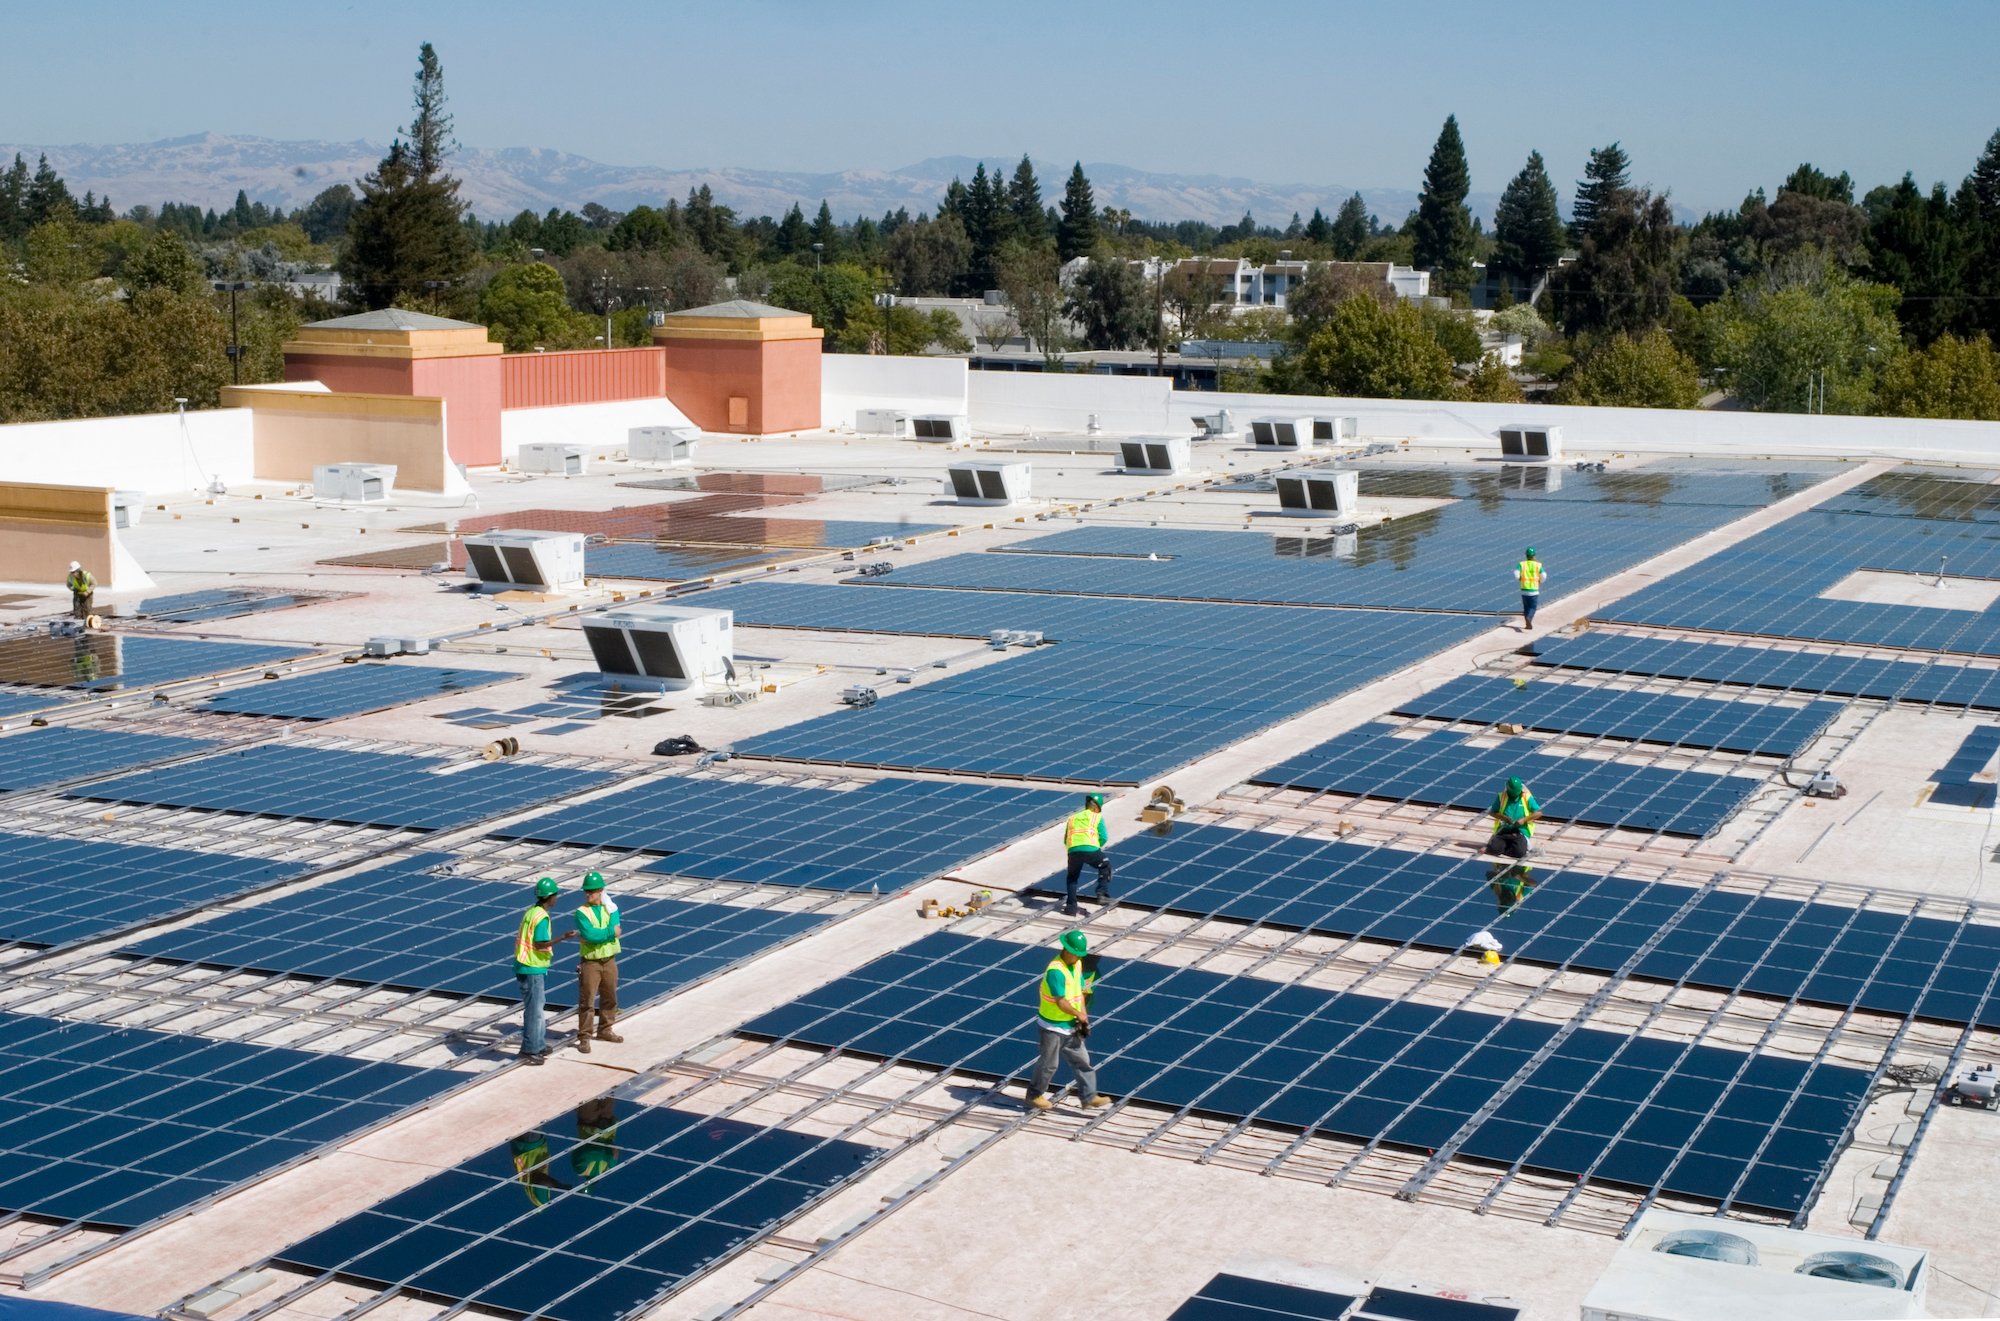 Solar panel installation atop a Walmart store in Mountain View, California. Texas environmentalists hope to convince Target to take similar steps toward solar power in the Lone Star State.